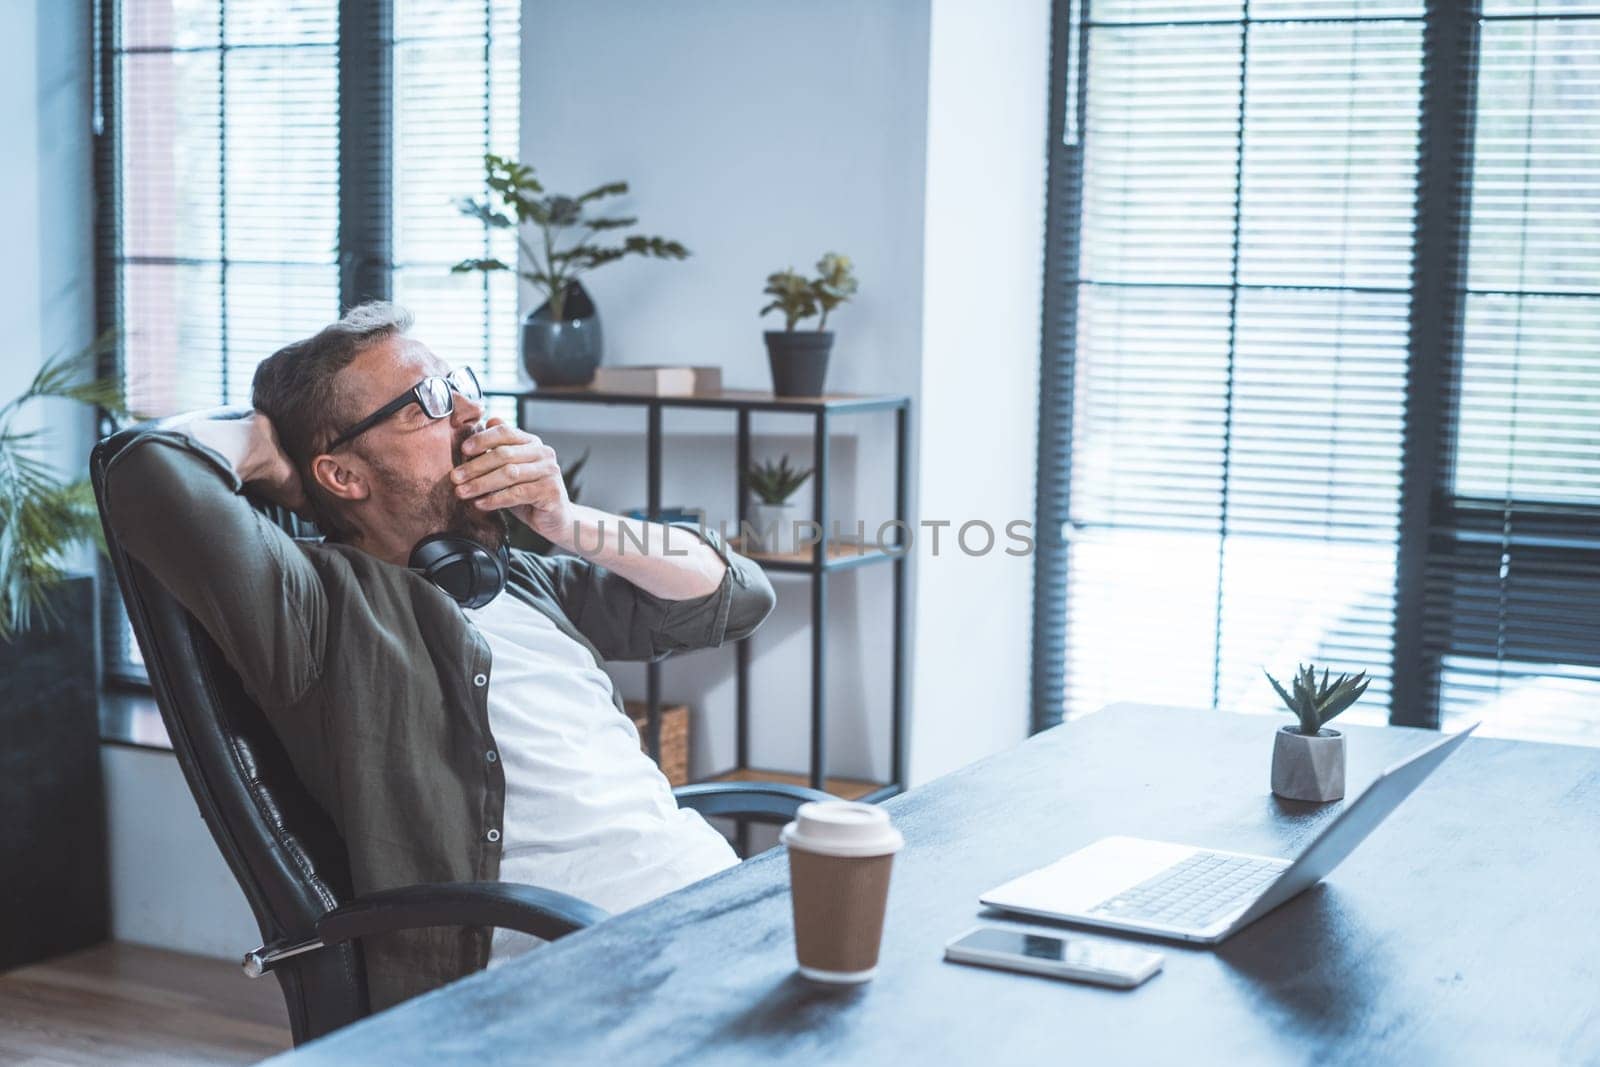 Tired and overworked office worker sitting at desk in office, working on notebook. Worker appears exhausted and bored, likely due stress and fatigue of meeting work deadlines and multitasking. by LipikStockMedia